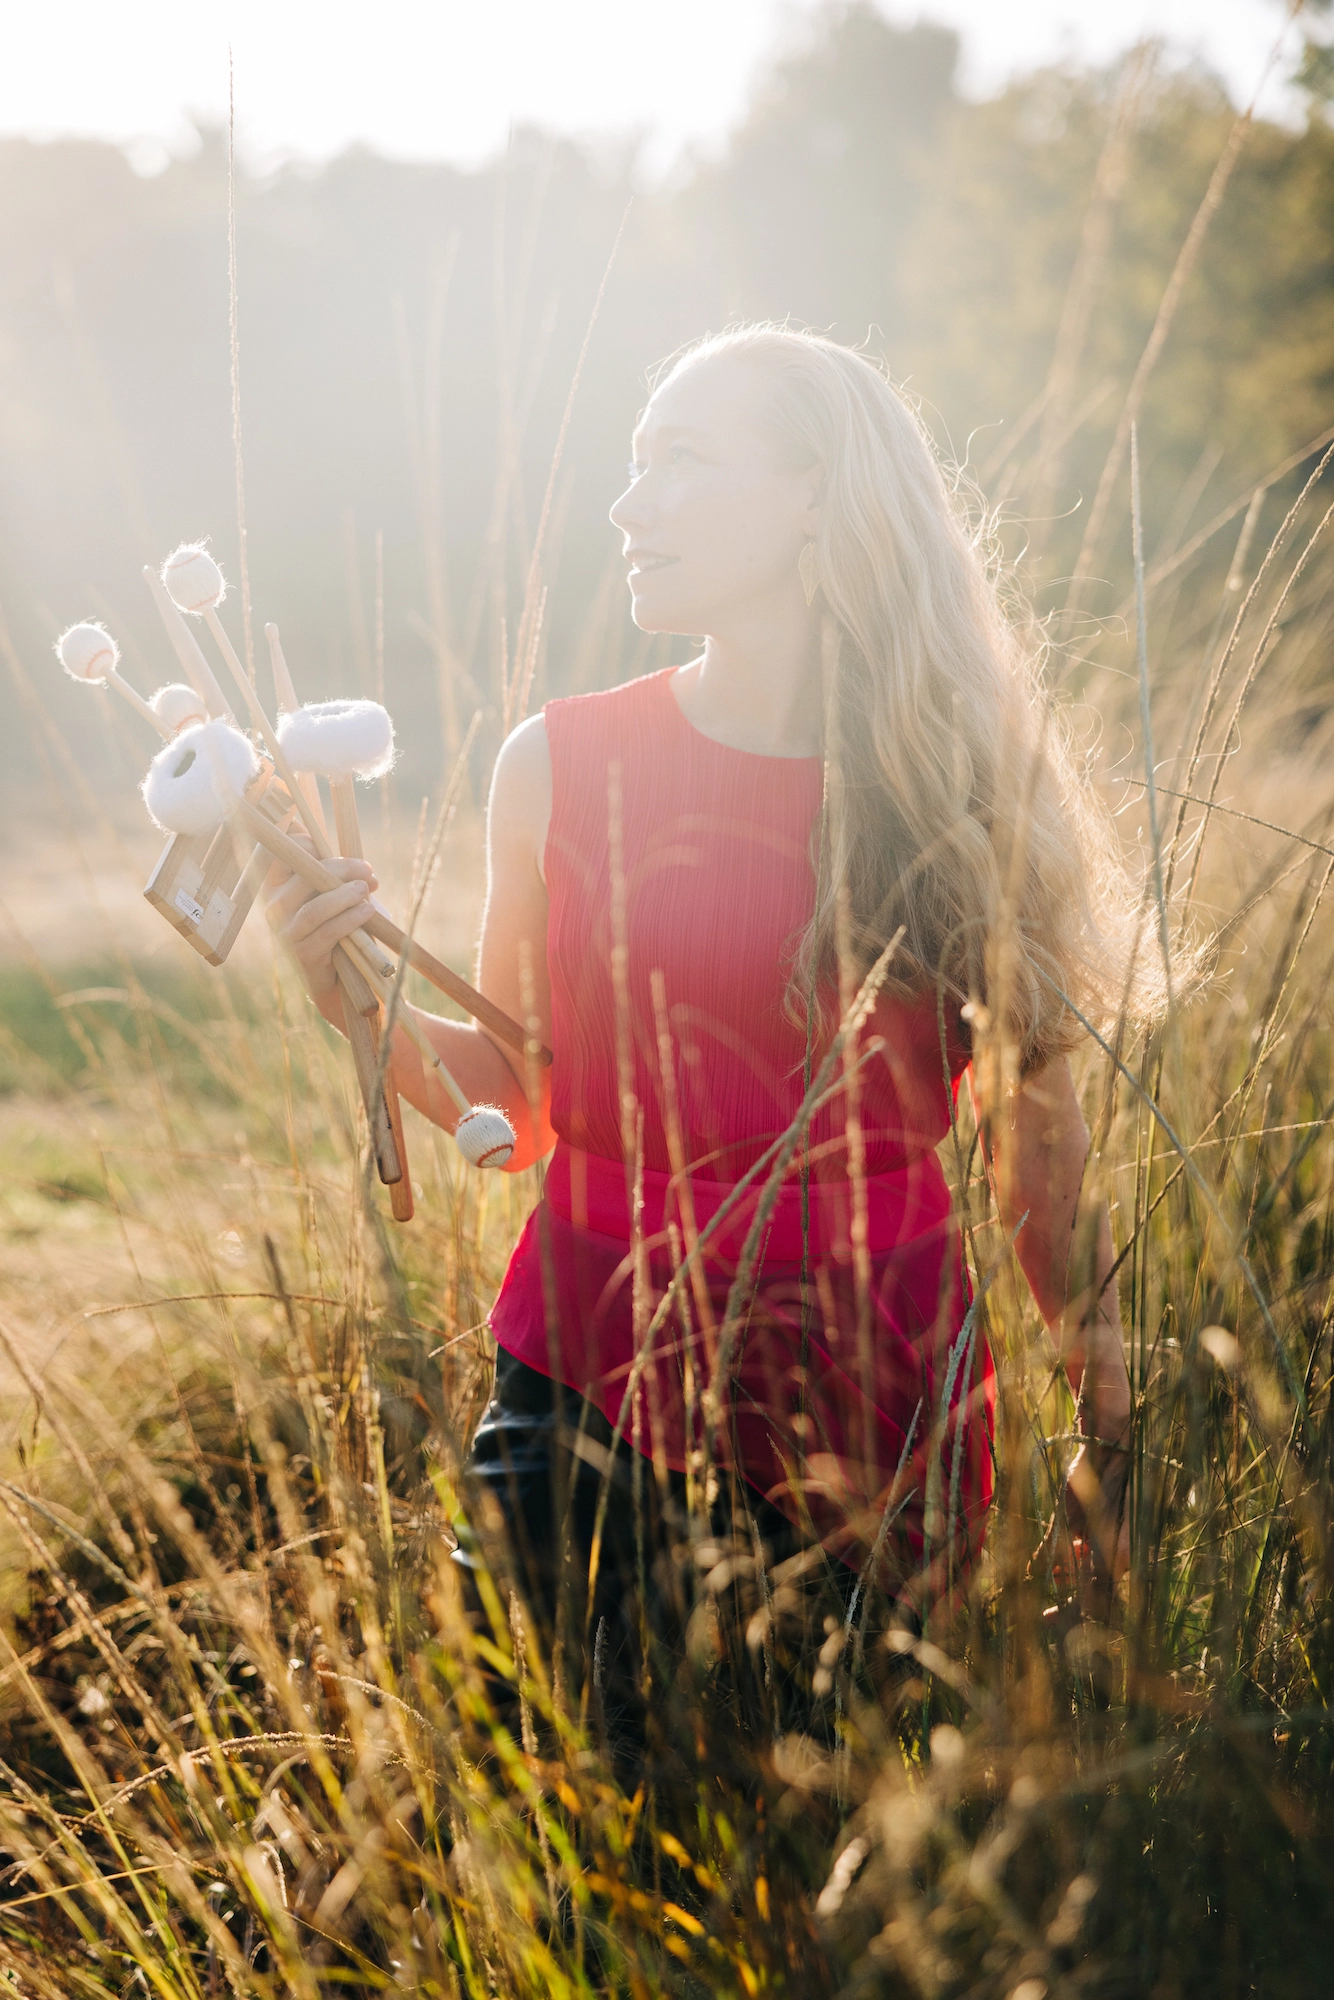 a photo of Bonnie Whiting walking through a meadow, with mallets in her hand